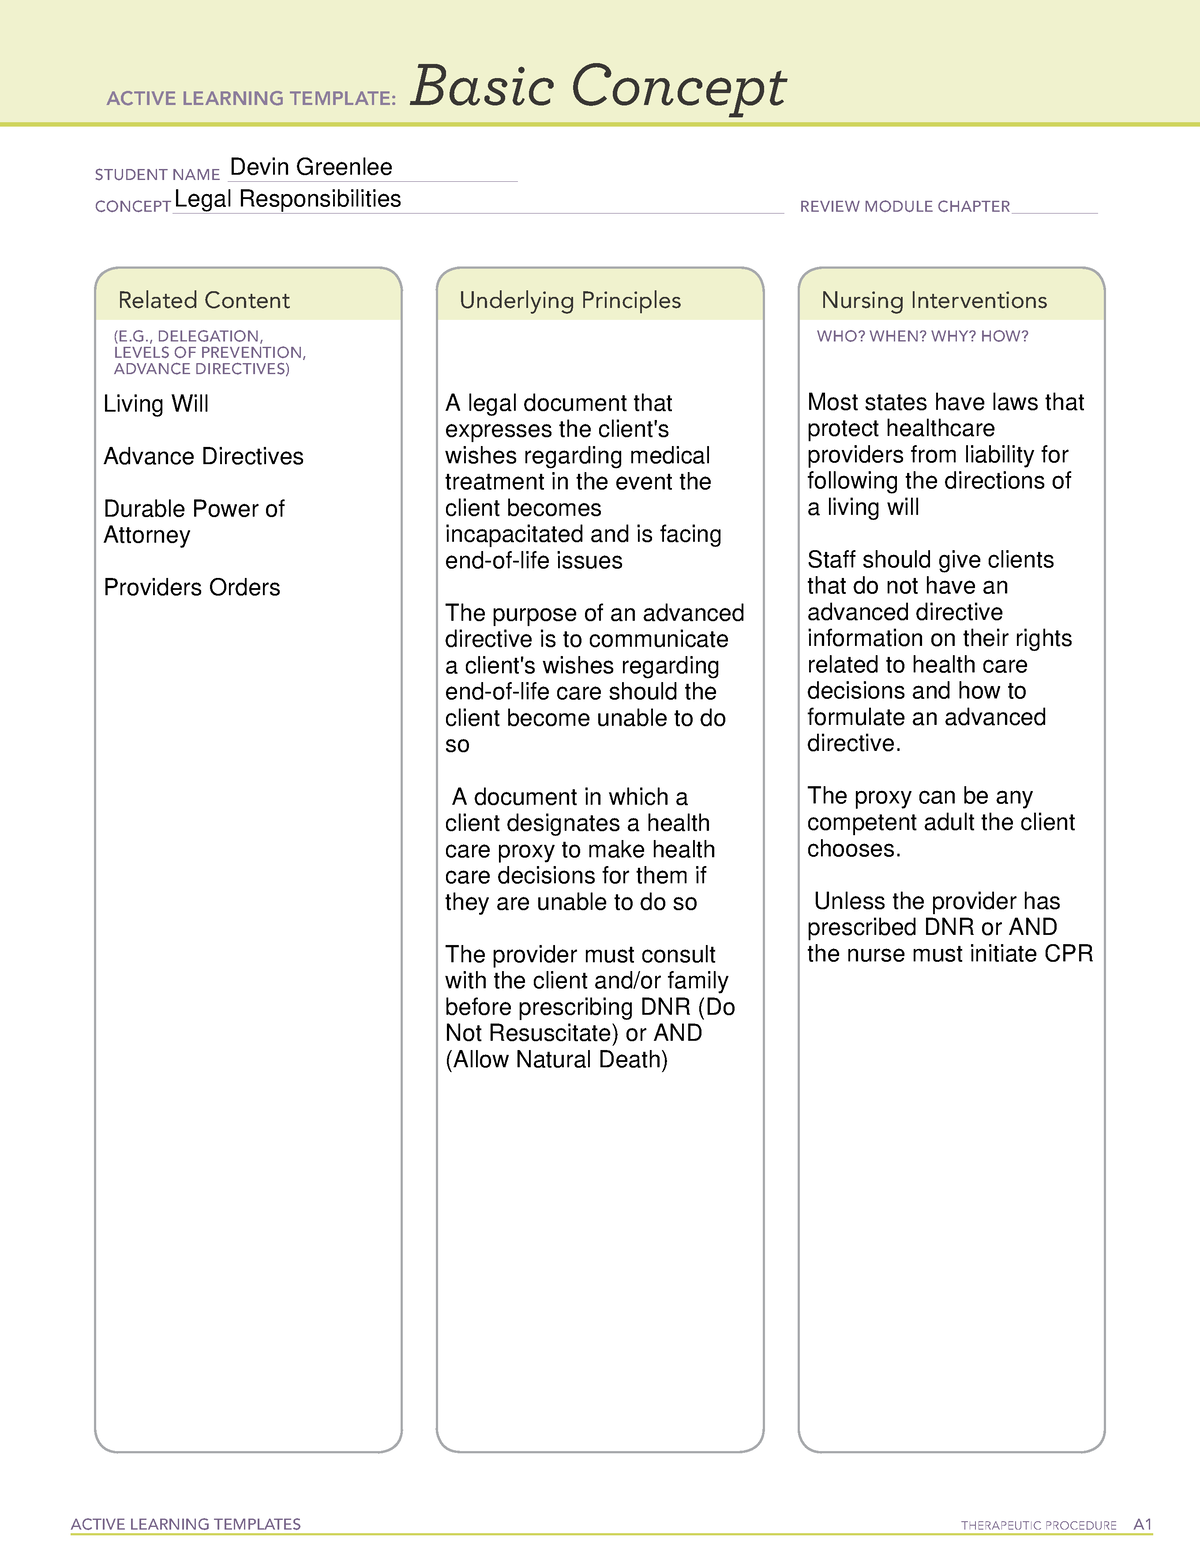 active-learning-template-basic-concept-active-learning-templates-therapeutic-procedure-a-basic